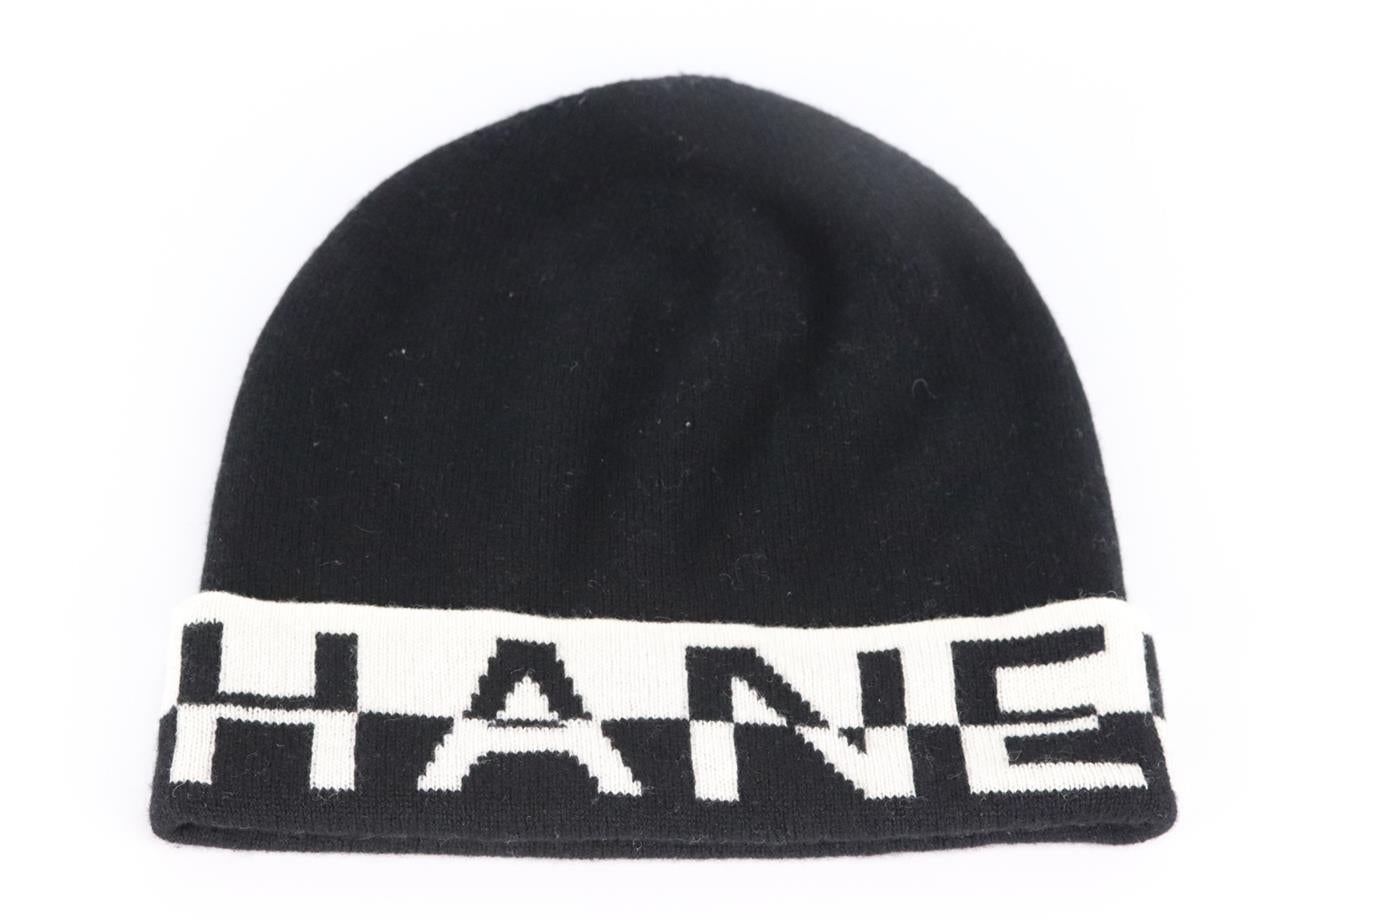 Chanel 2020 logo intarsia cashmere beanie. Black and white. Slips on. 100% Cashmere. Does not come with dustbag or box. Length: 9.5 in. Circumference: 18.8 in. Very good condition - No sign of wear; see pictures.